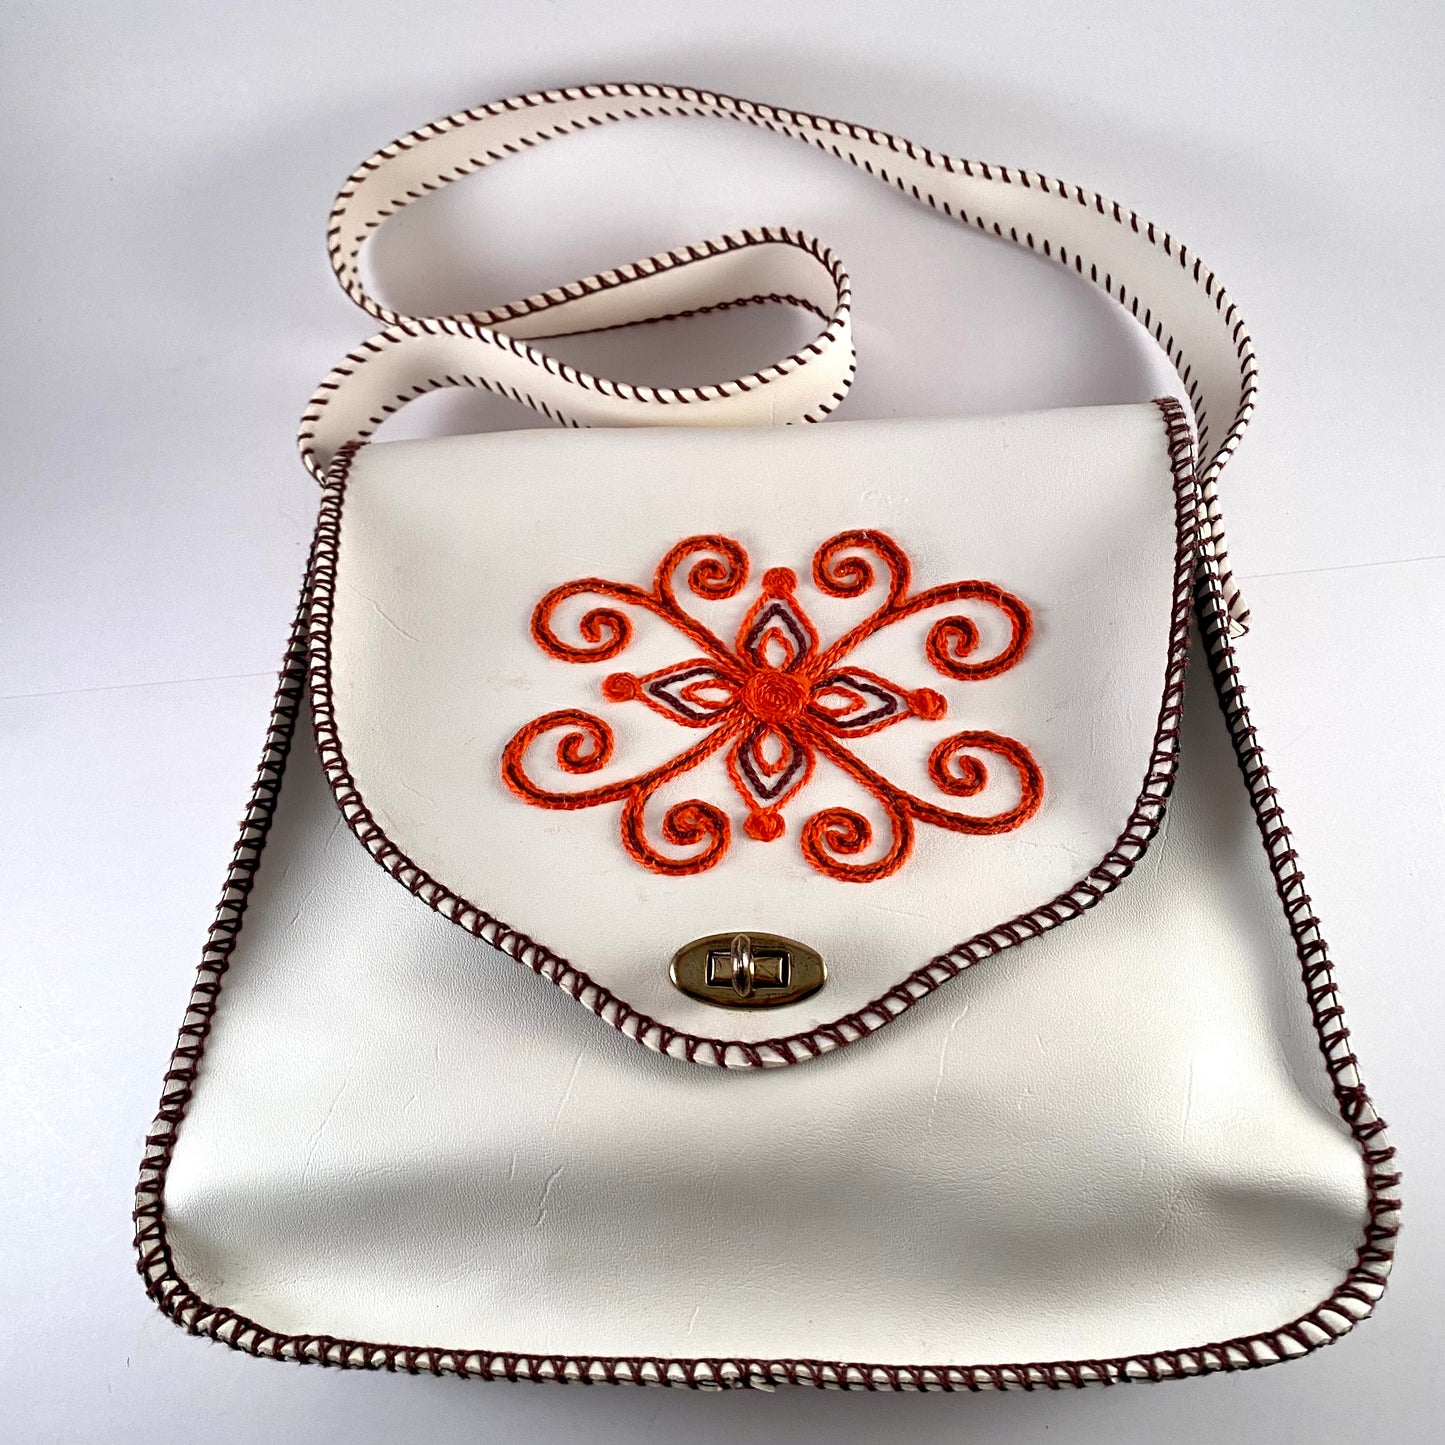 Late 60s/ Early 70s Embroidery Embellished Handbag